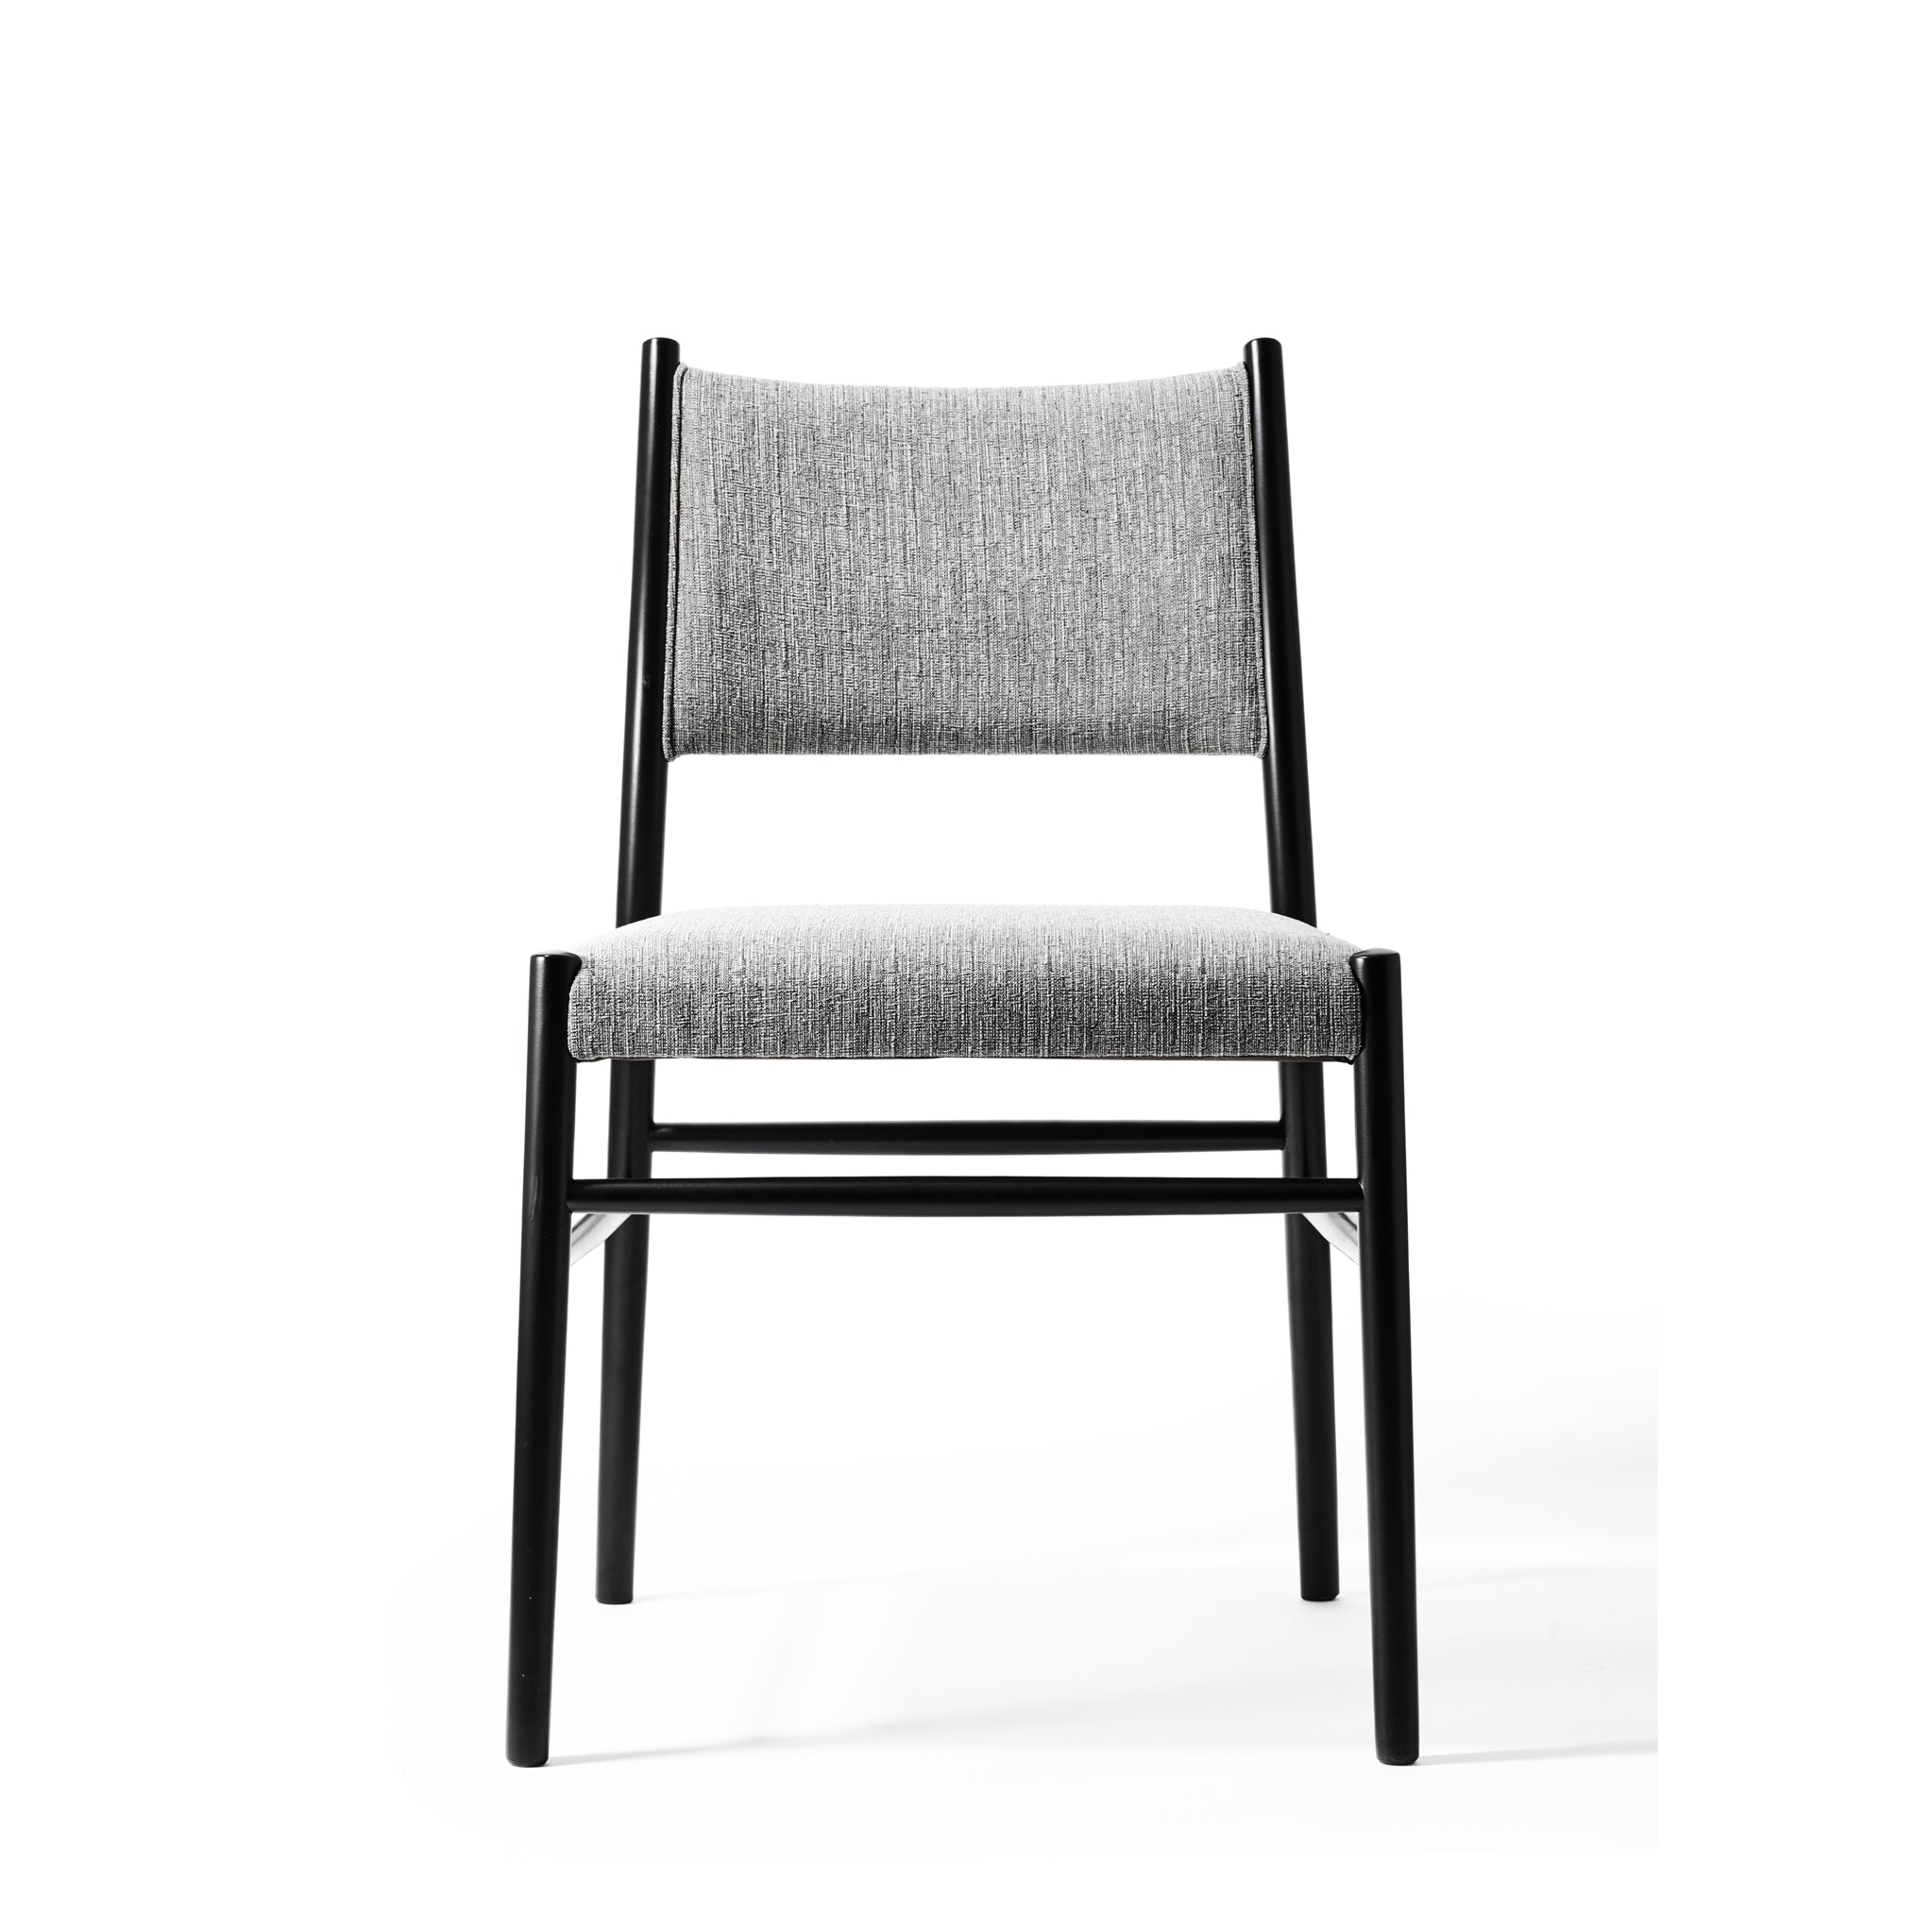 PM208_READY-MADE_side chair – ROCKSTONE